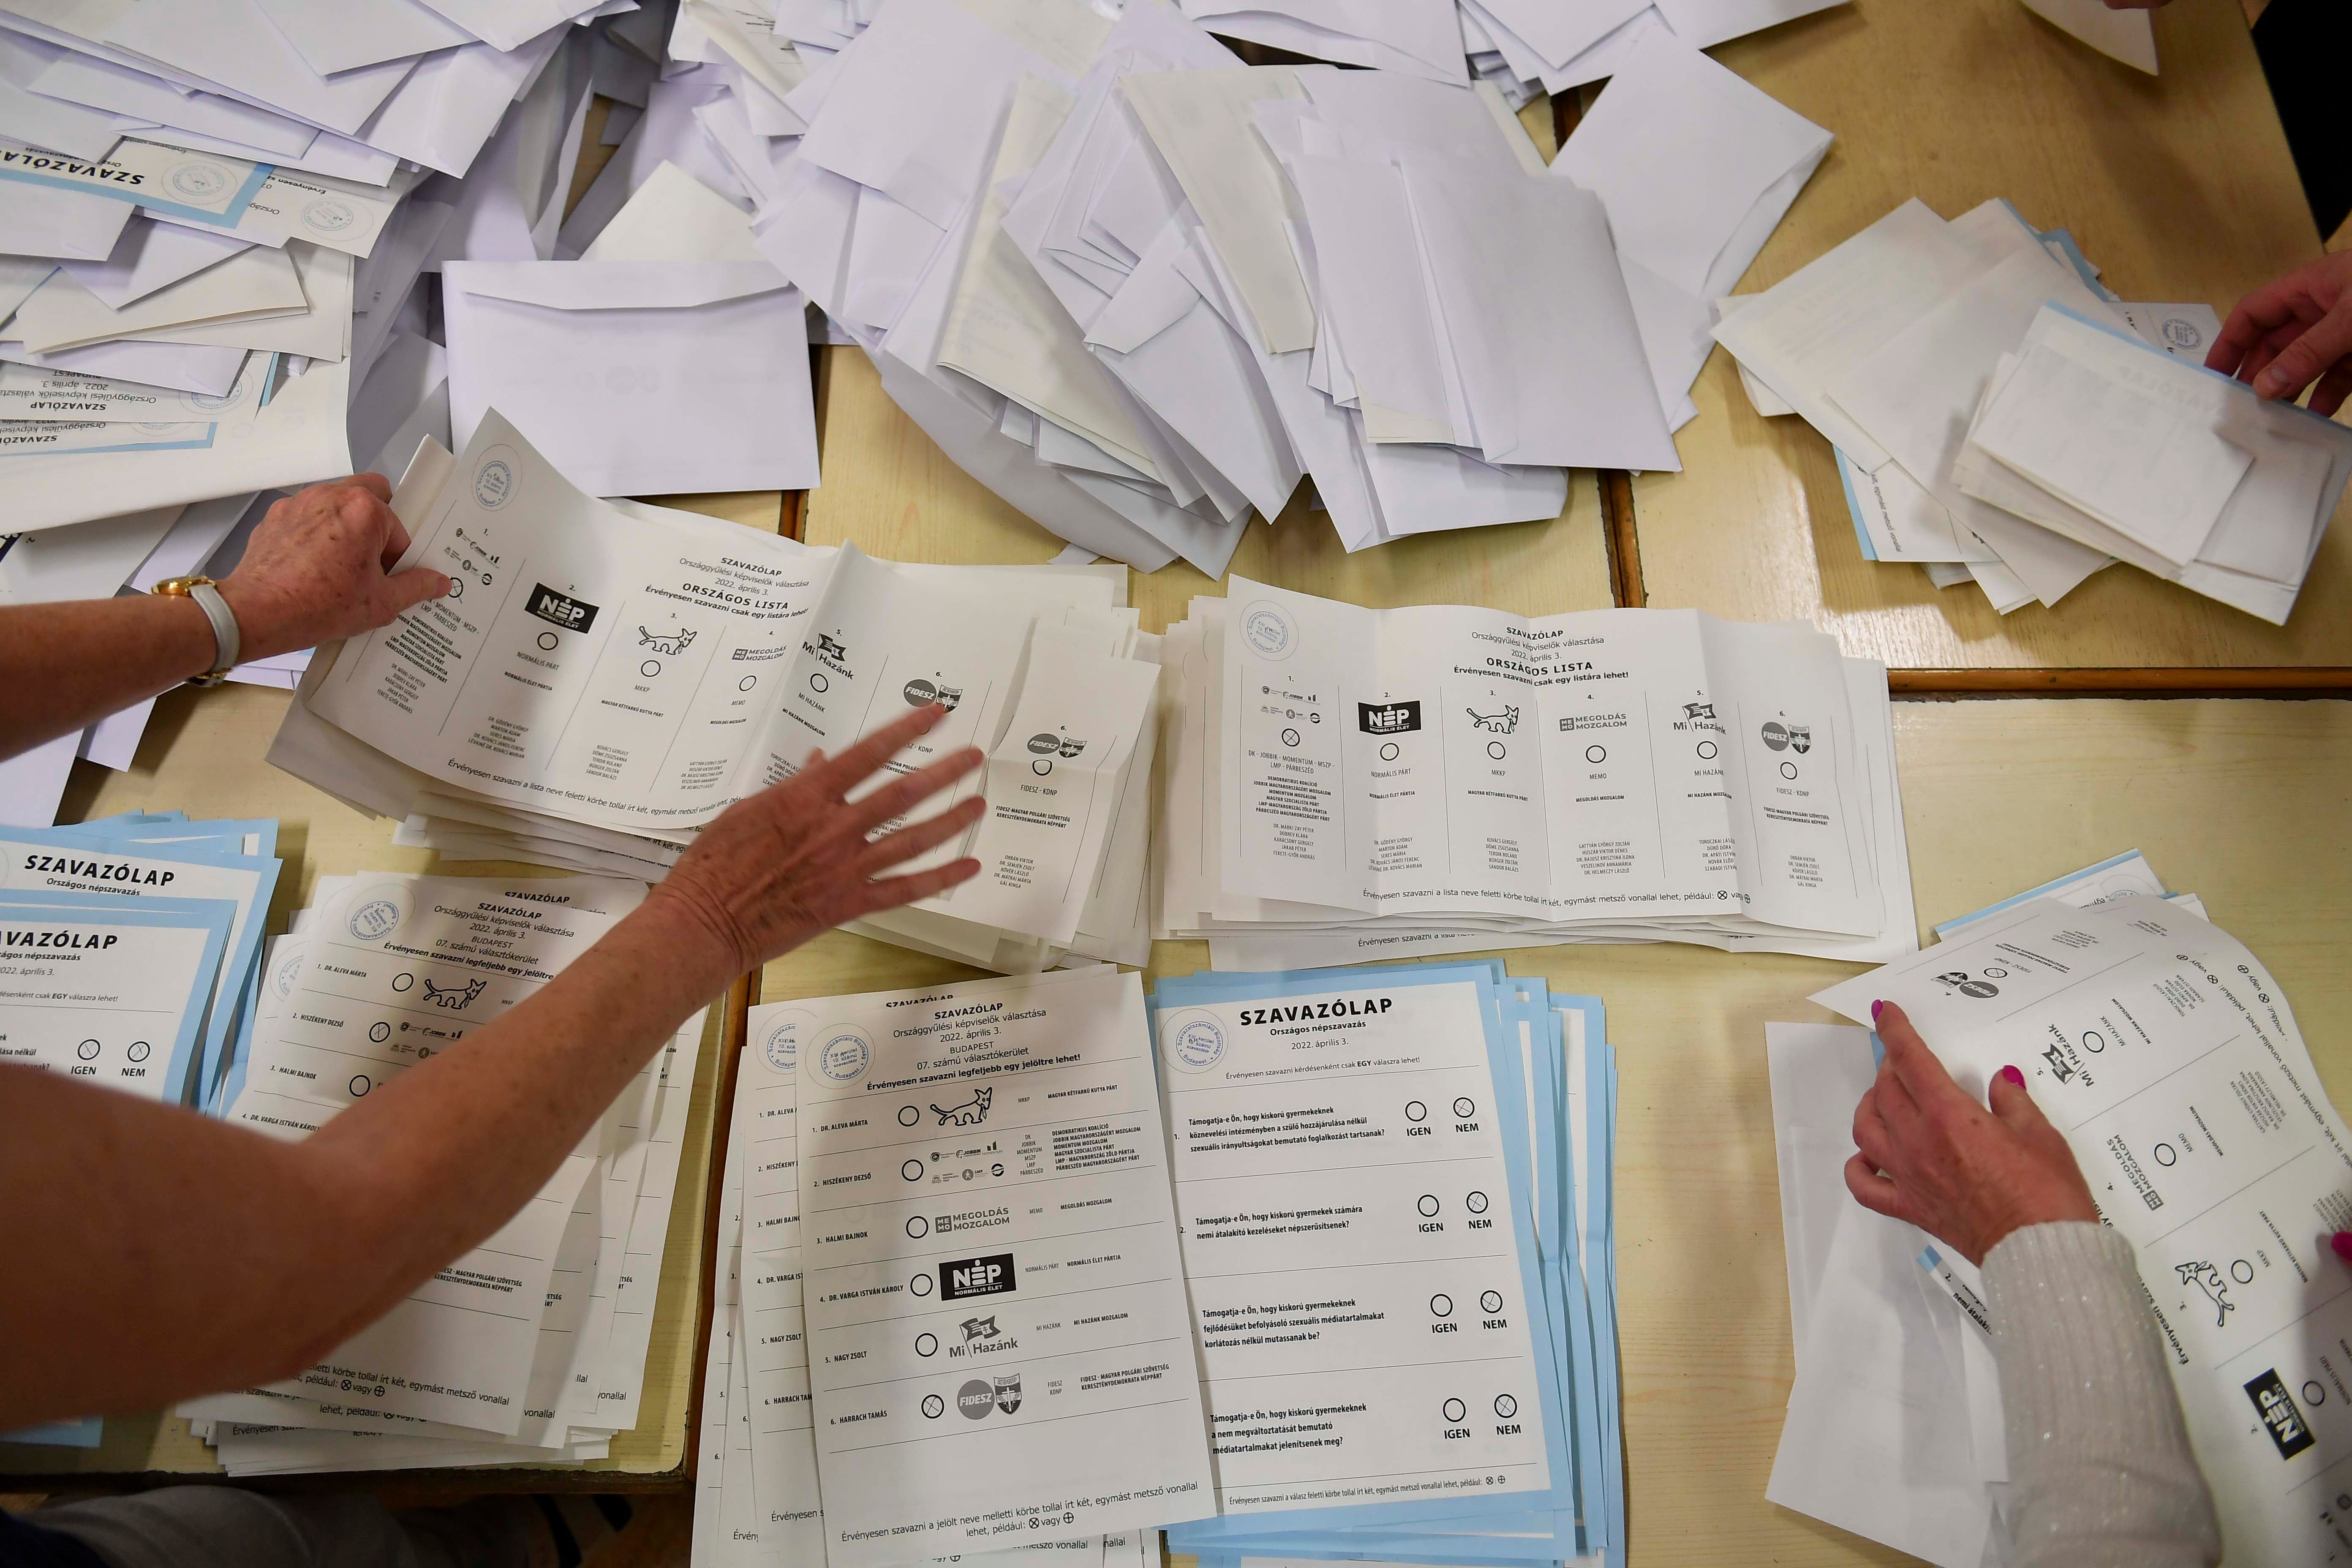 Ballots are being counted after polling stations closed for the general election in Budapest, Hungary, Sunday, April 3, 2022.